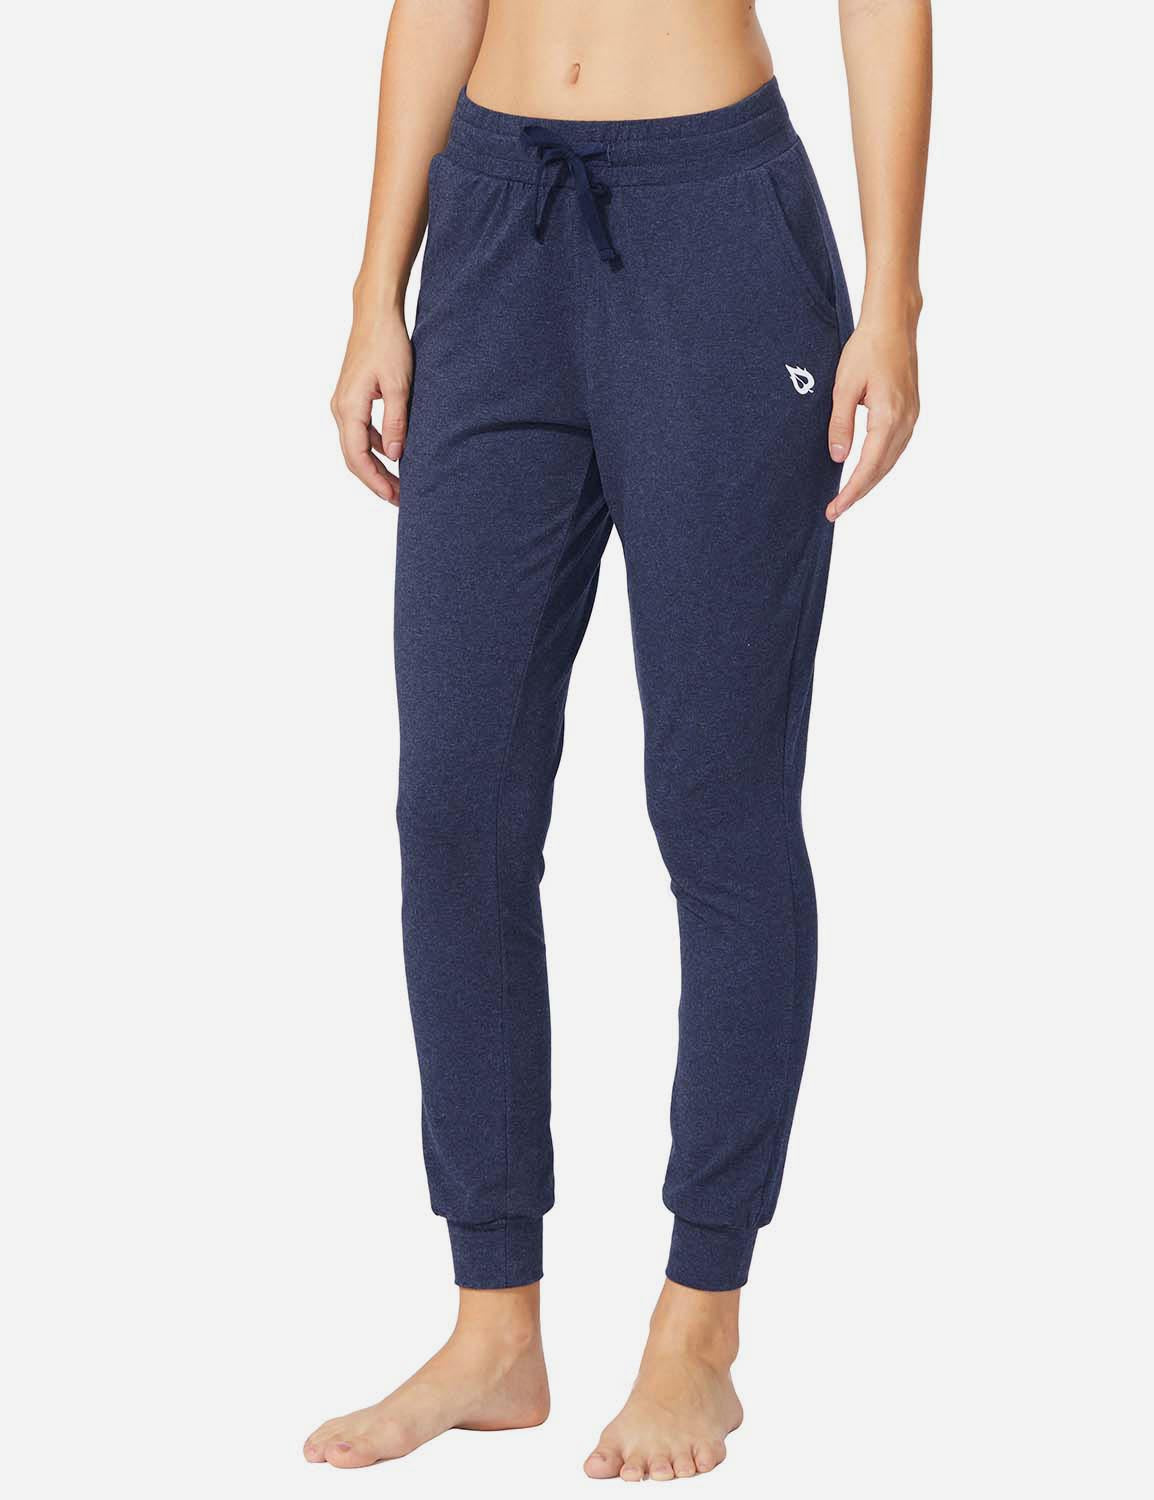 Baleaf Women's Cotton Comfy Pocketed & Tapered Weekend Joggers abh103 Navy Heather Front